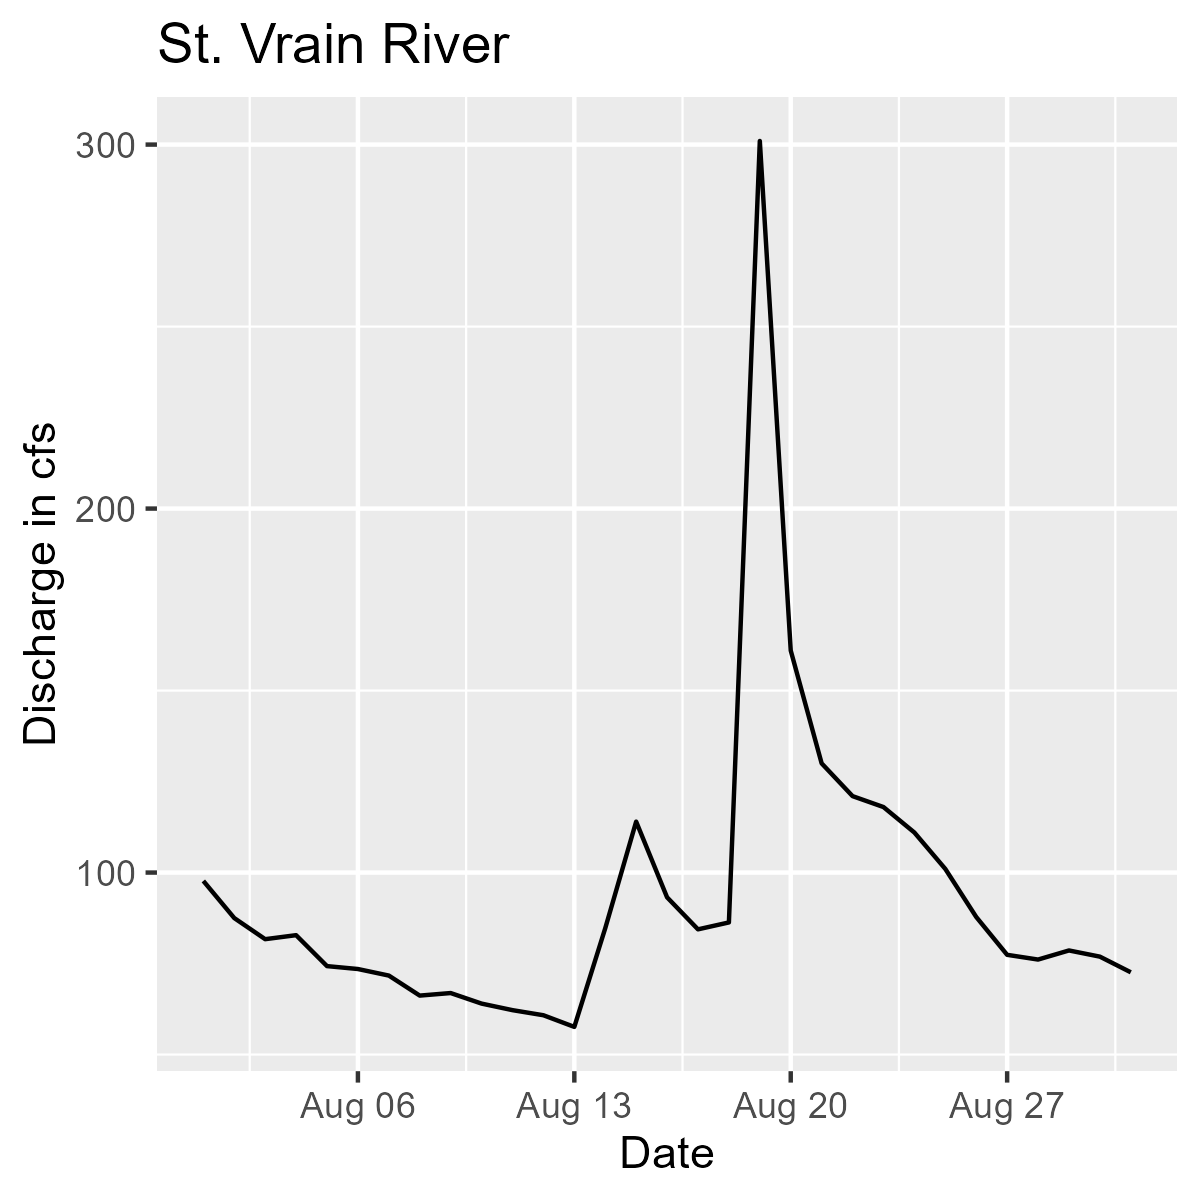 Line graph showing discharge in CFS by date for the Saint Vrain River during the month of August 2018.